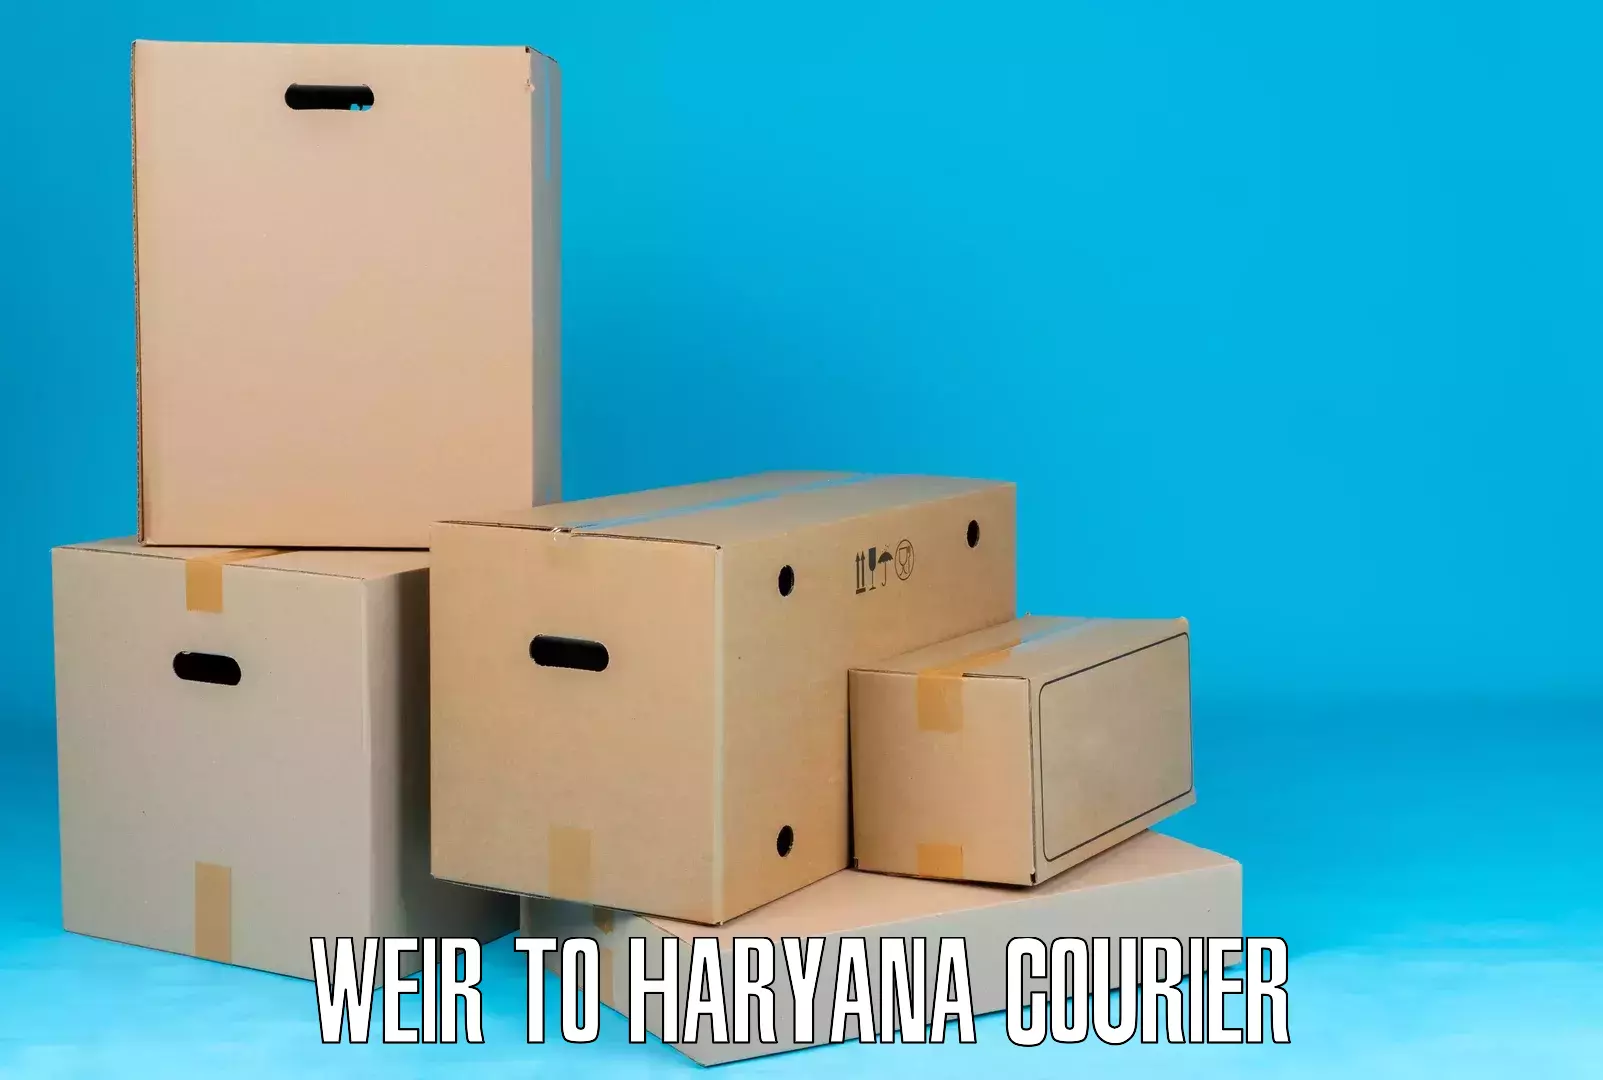 Courier app Weir to Haryana